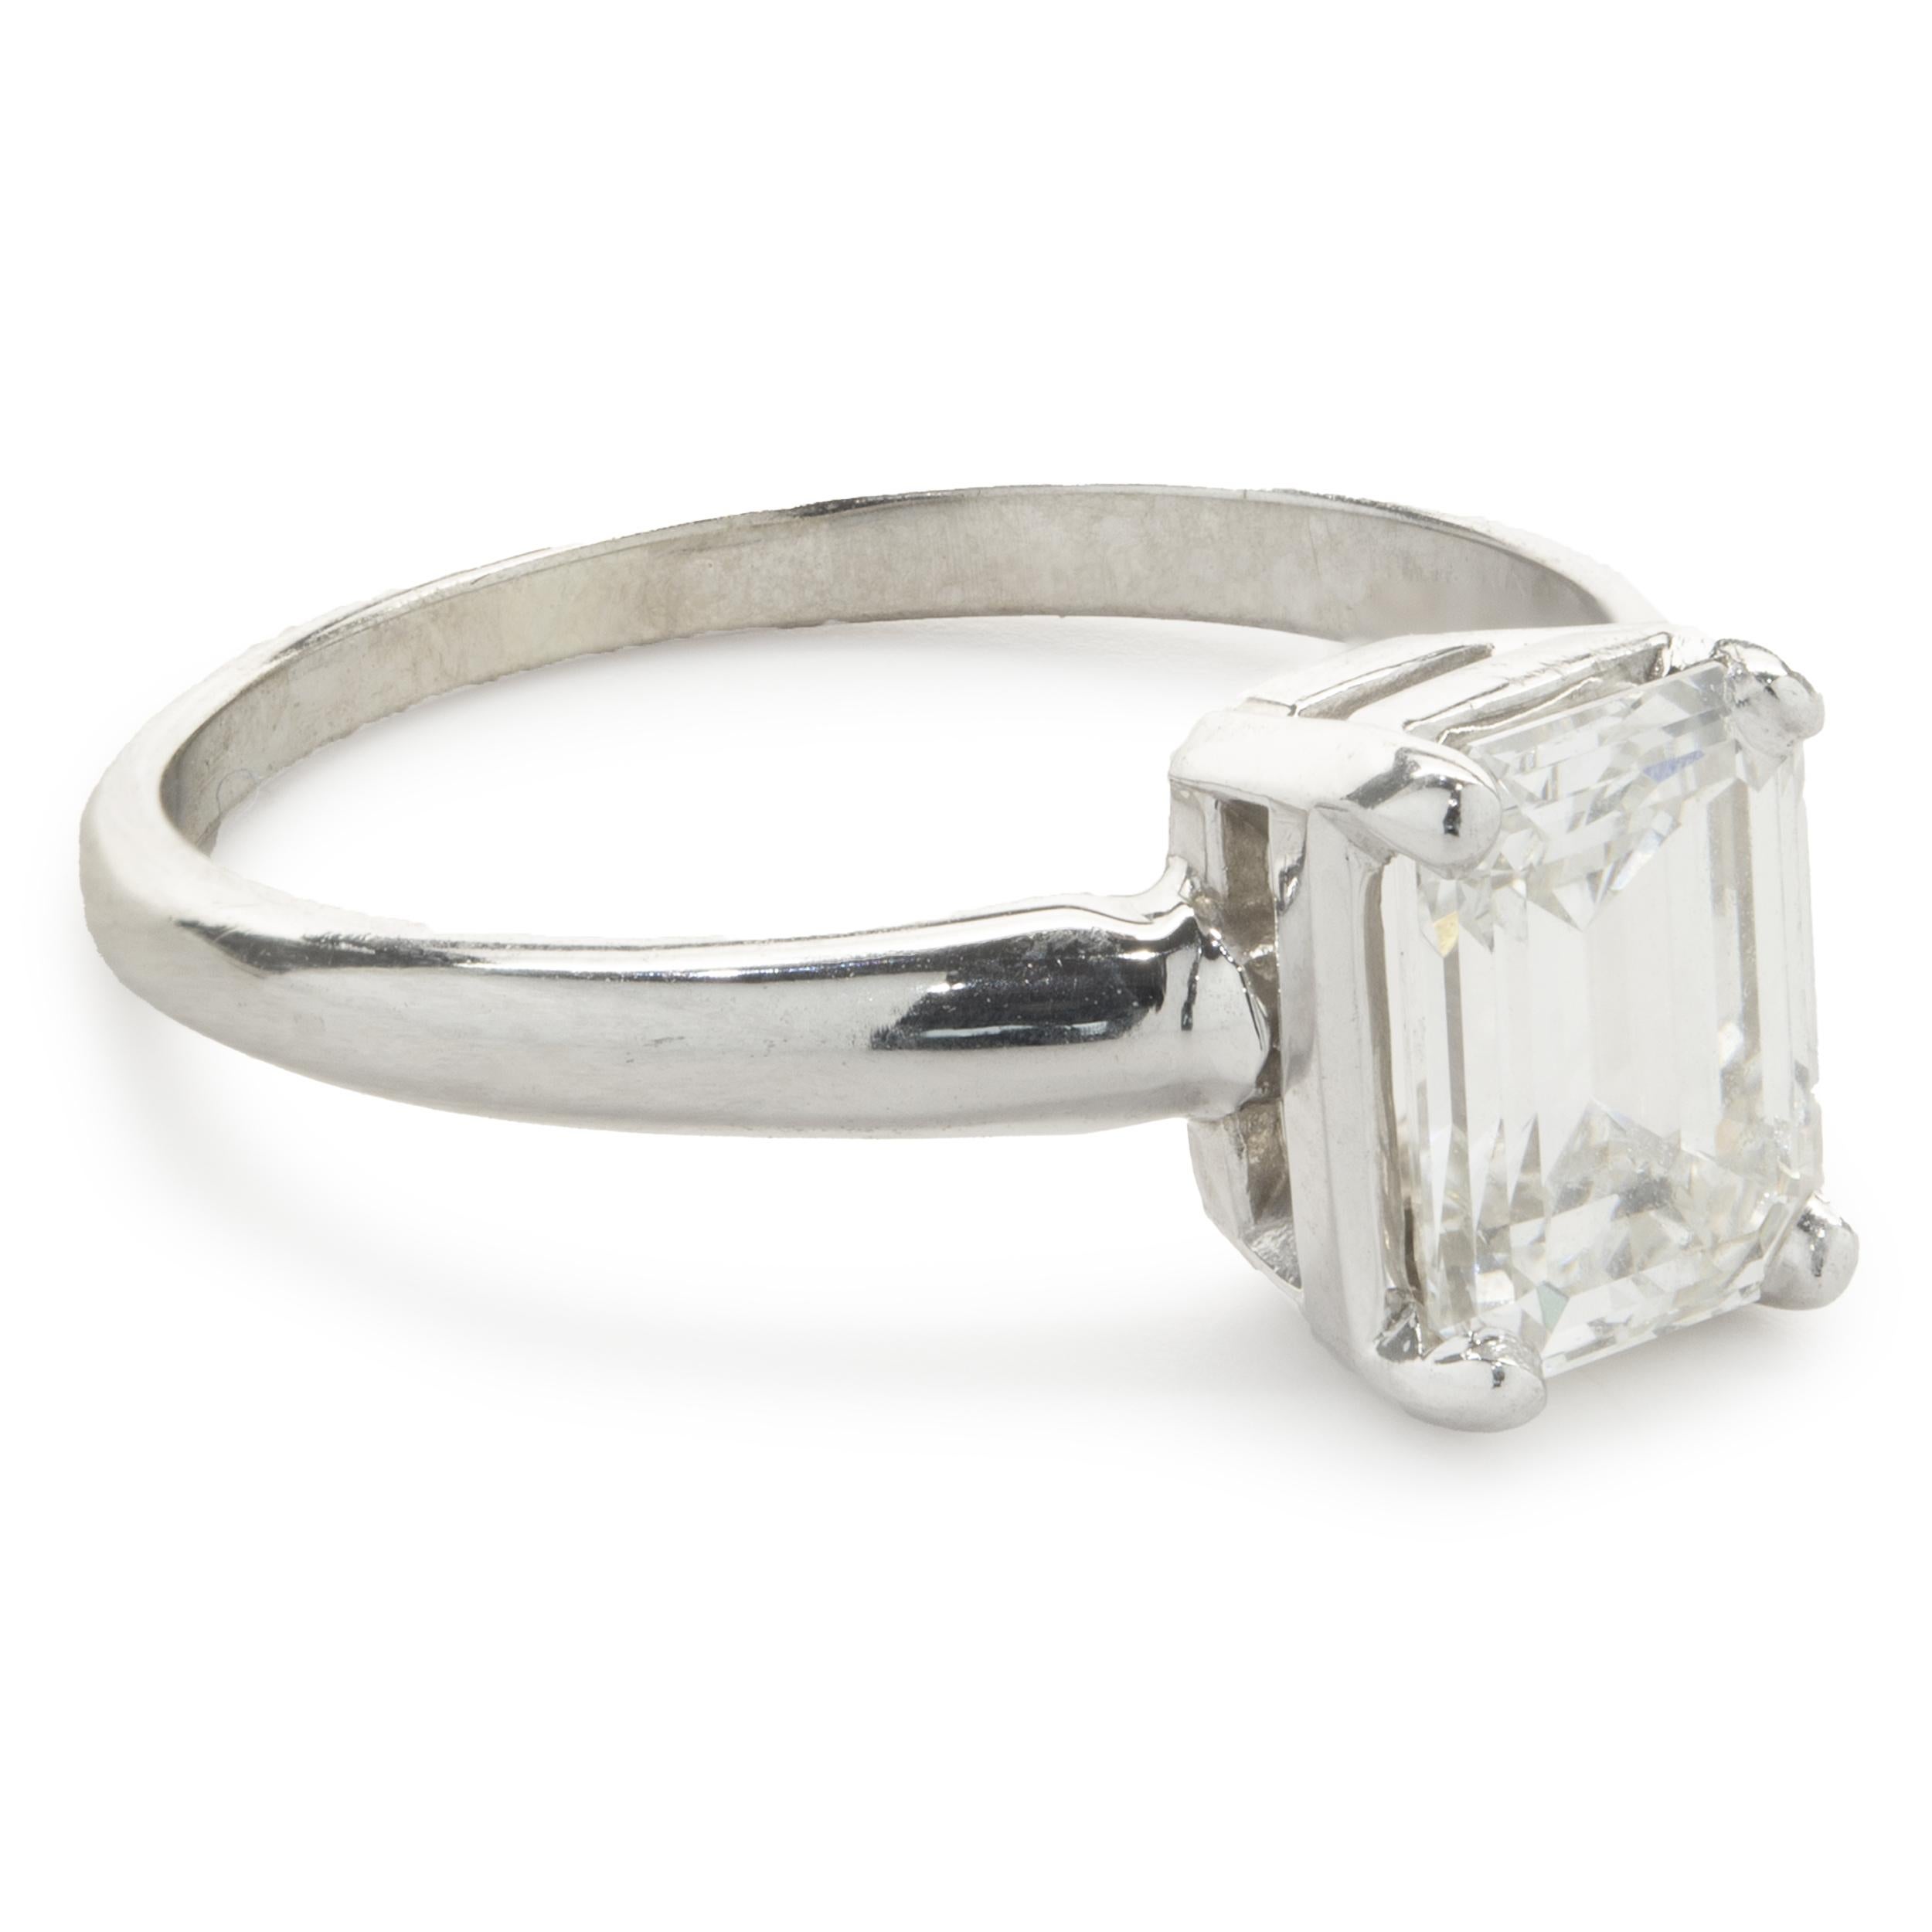 Designer: custom
Material: 14K white gold
Center Diamond: 1 emerald cut = 1.30ct
Color: I
Clarity: VVS2
GIA: 7233132095
Ring Size: 6 (please allow two additional shipping days for sizing requests)
Dimensions: ring top measures 7.89mm wide
Weight: